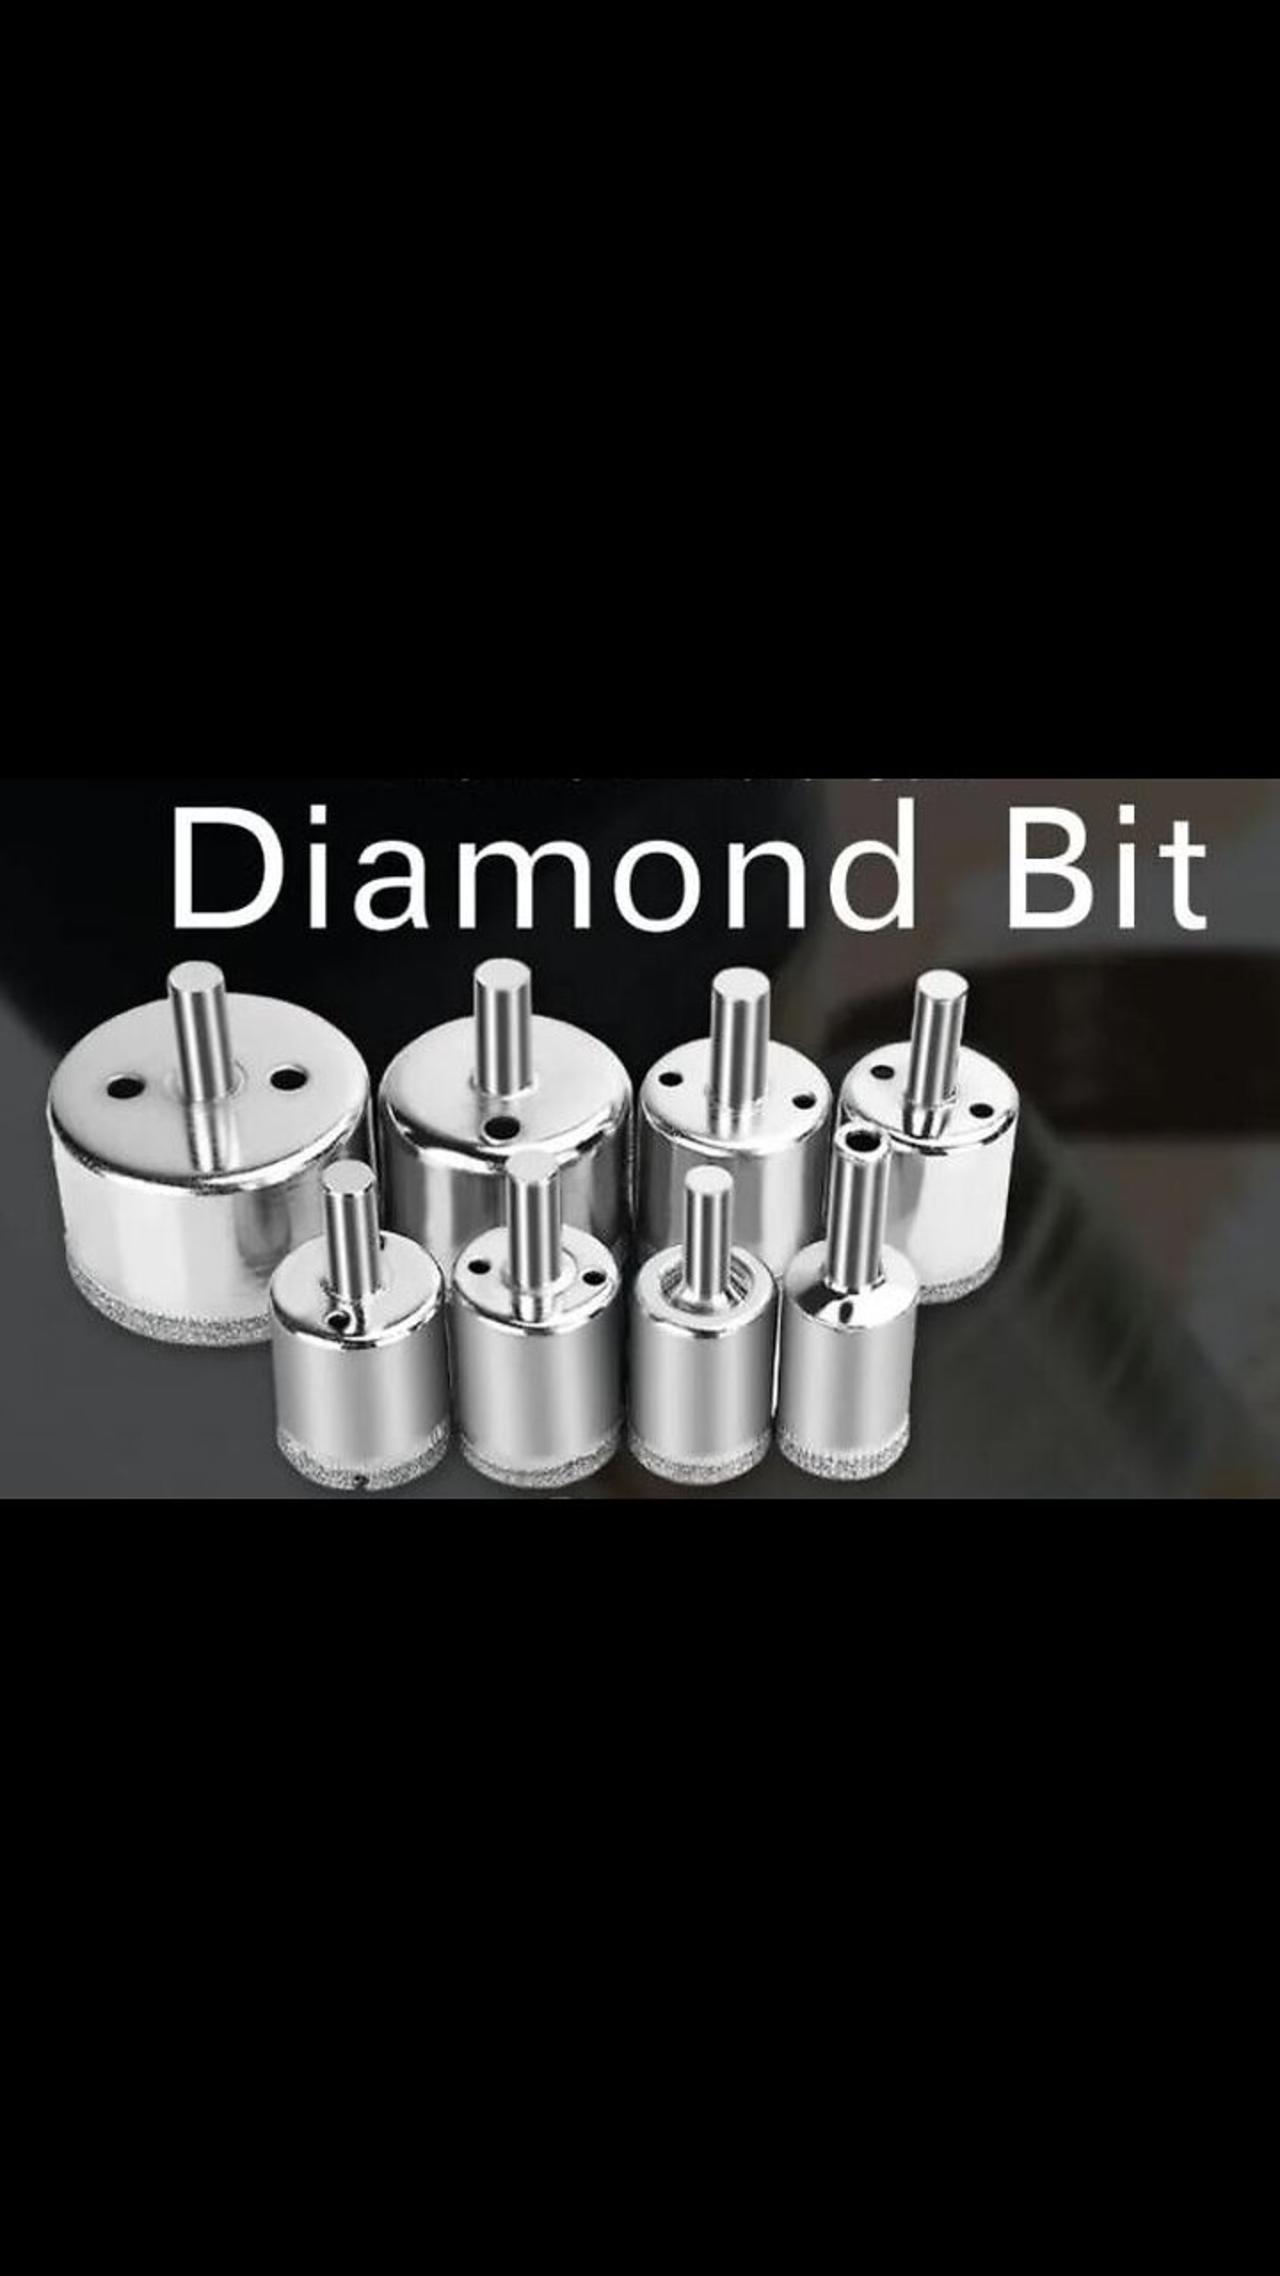 Diamond Coated Drill Bits Set - One News Page VIDEO